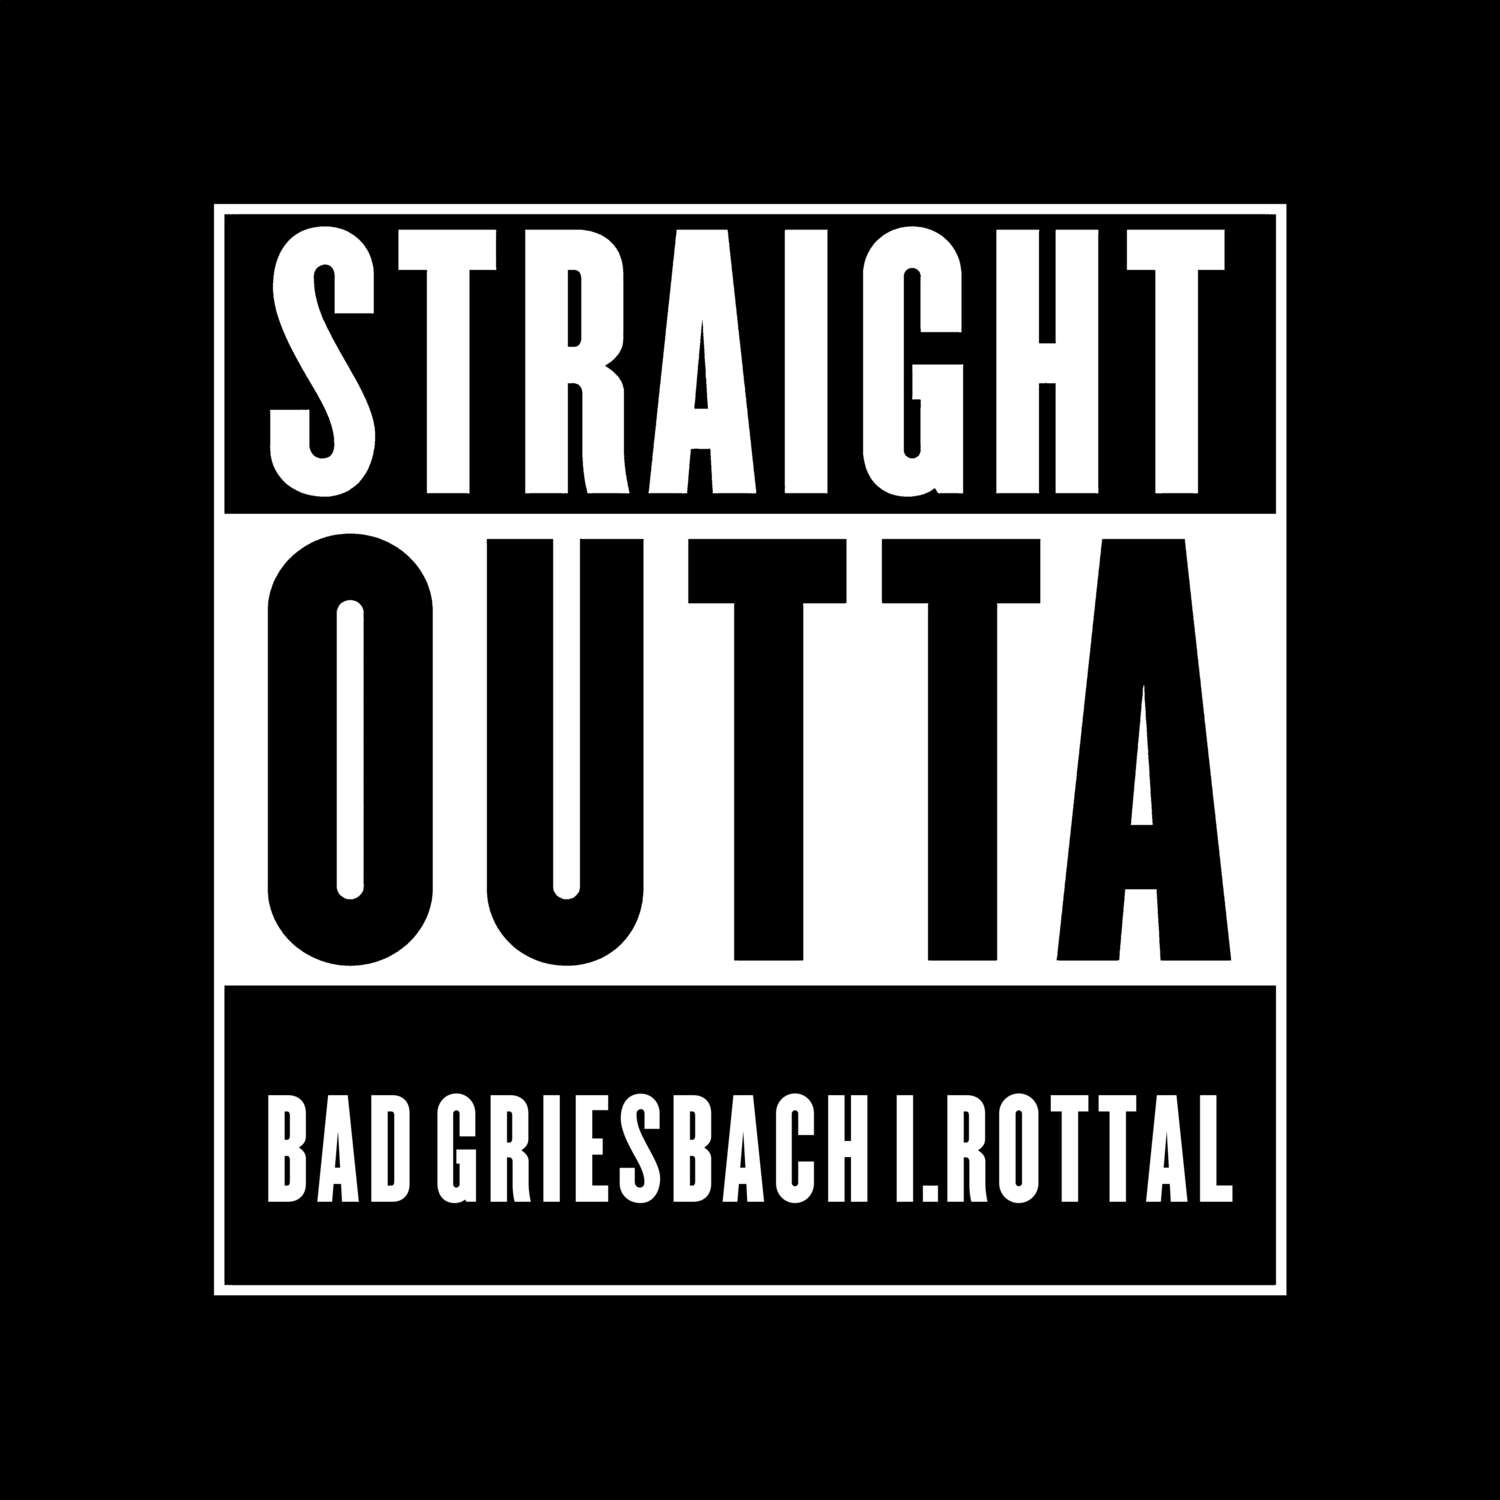 Bad Griesbach i.Rottal T-Shirt »Straight Outta«